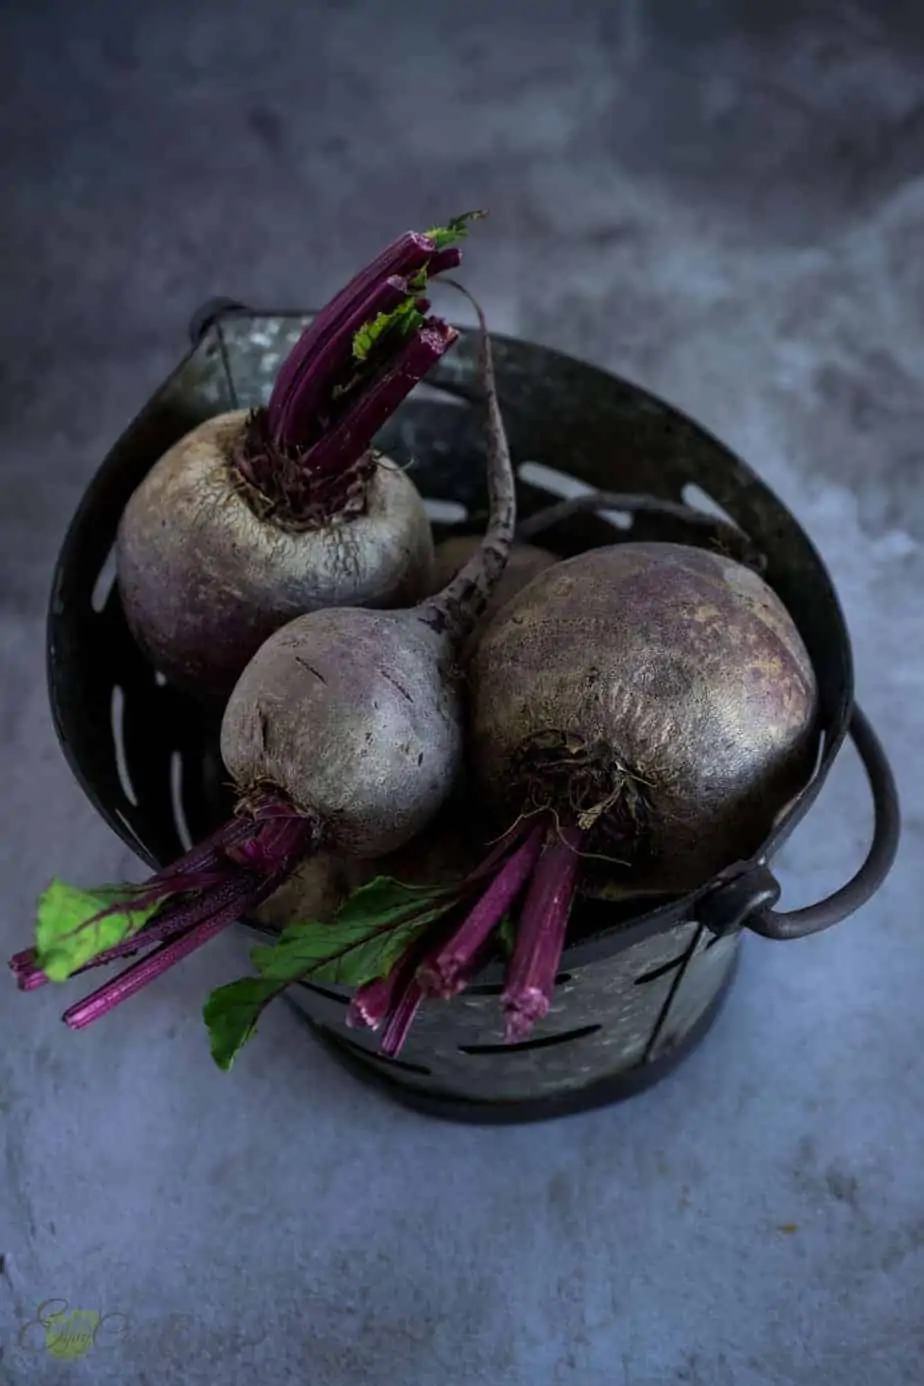 beetroots raw in a small metal basket before cooking.